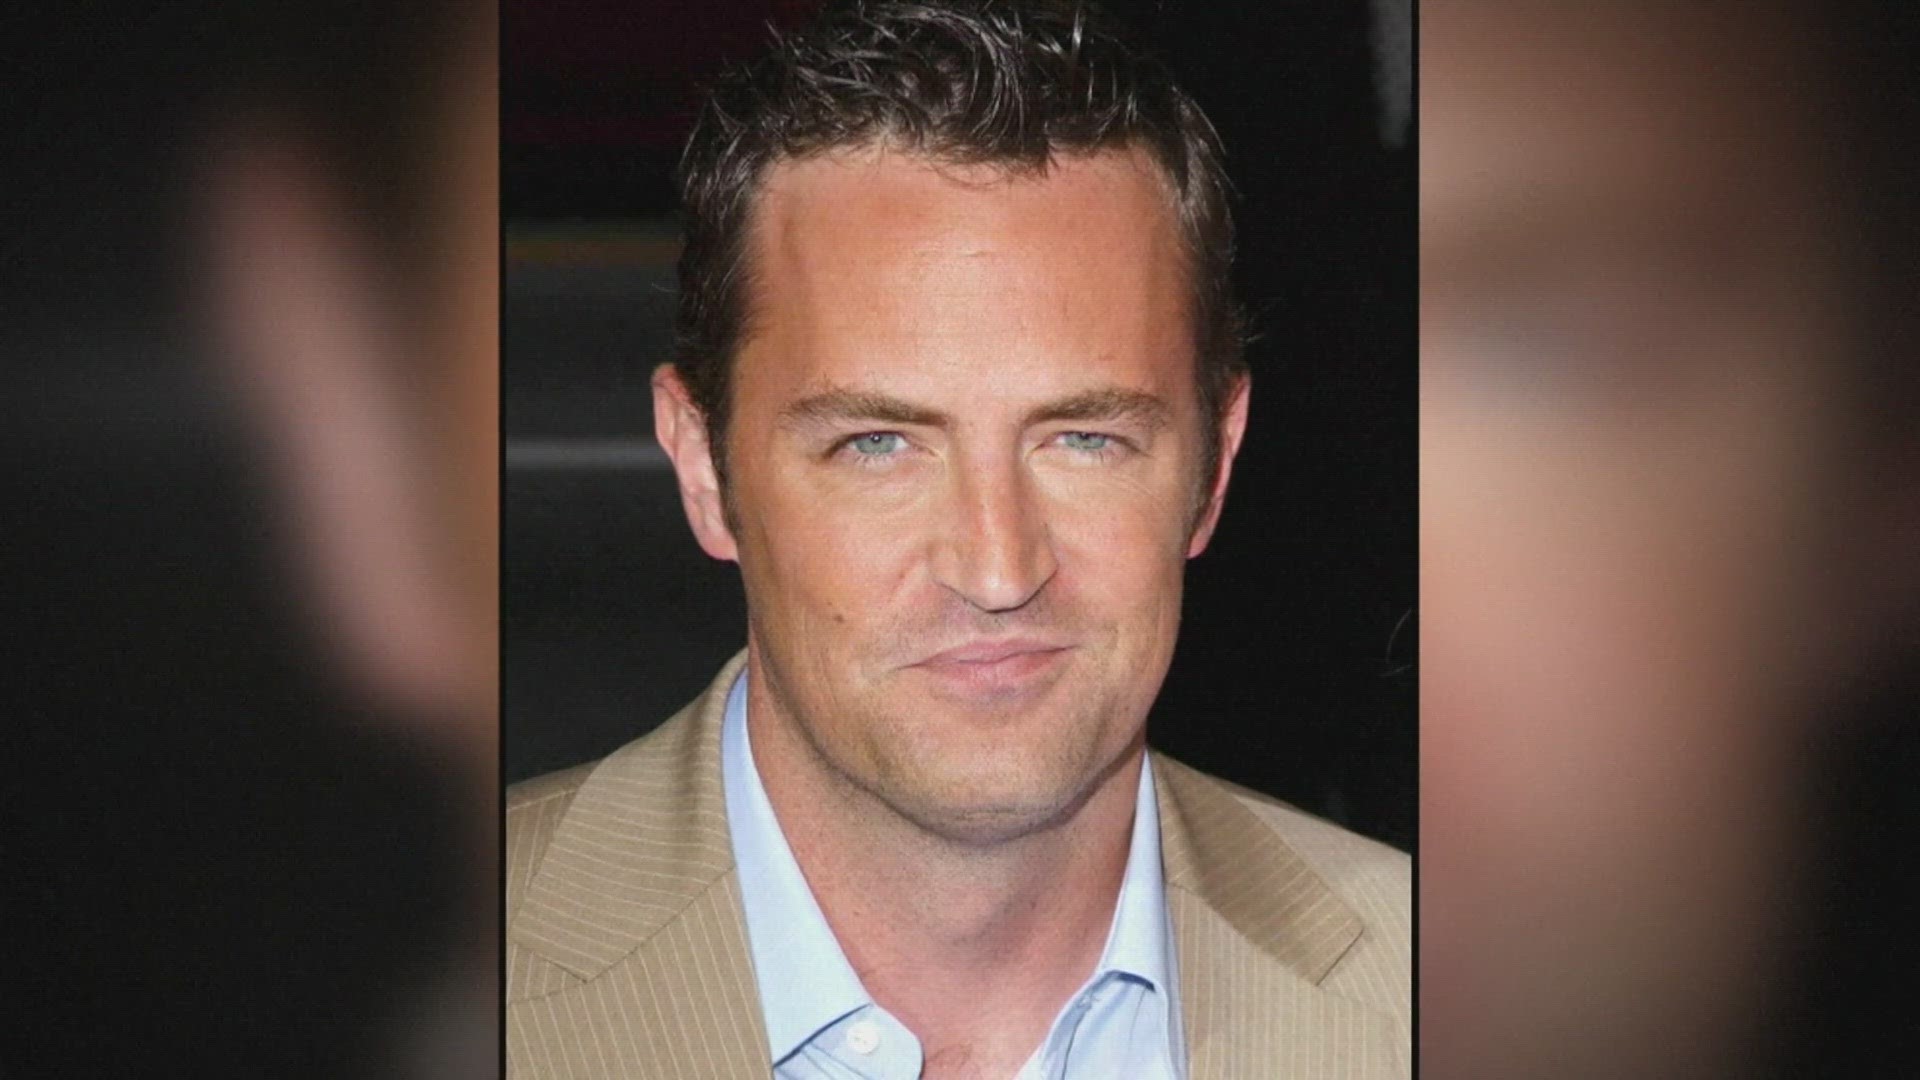 Perry, who played Chandler Bing on NBC’s “Friends” for 10 seasons, was found dead at his Los Angeles home on Saturday.